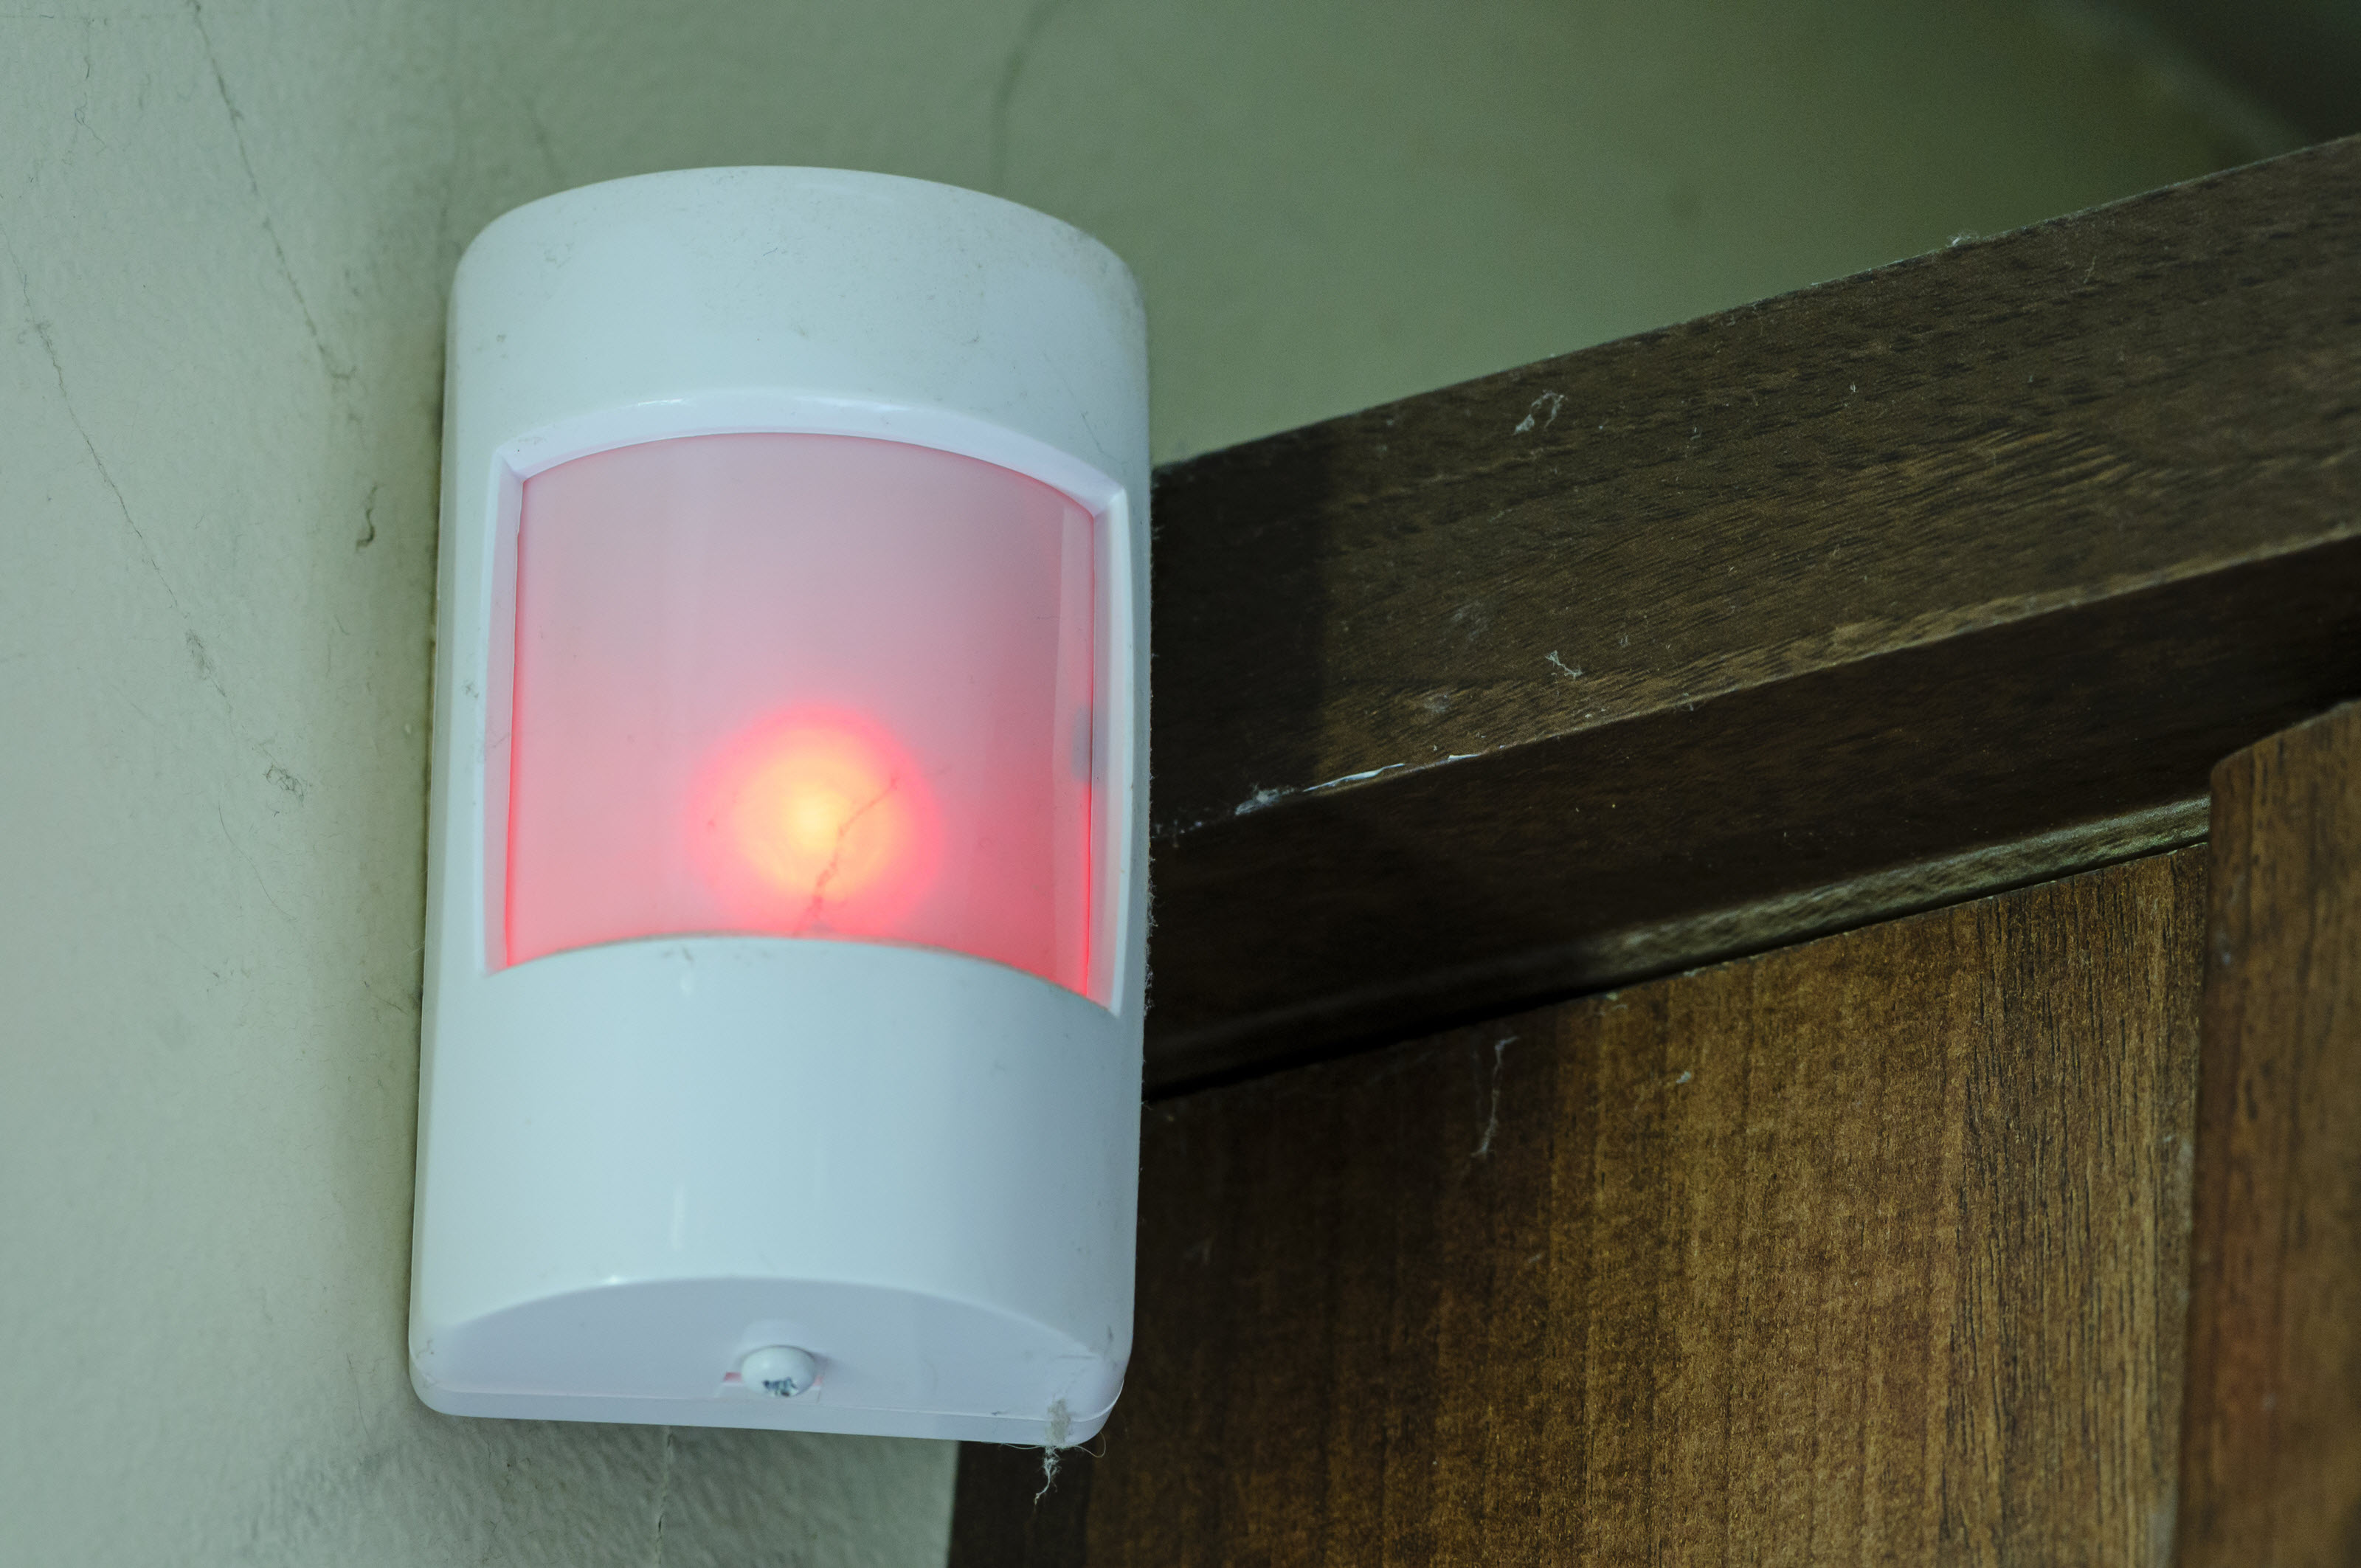 Motion sensor lights add security and safety and save money